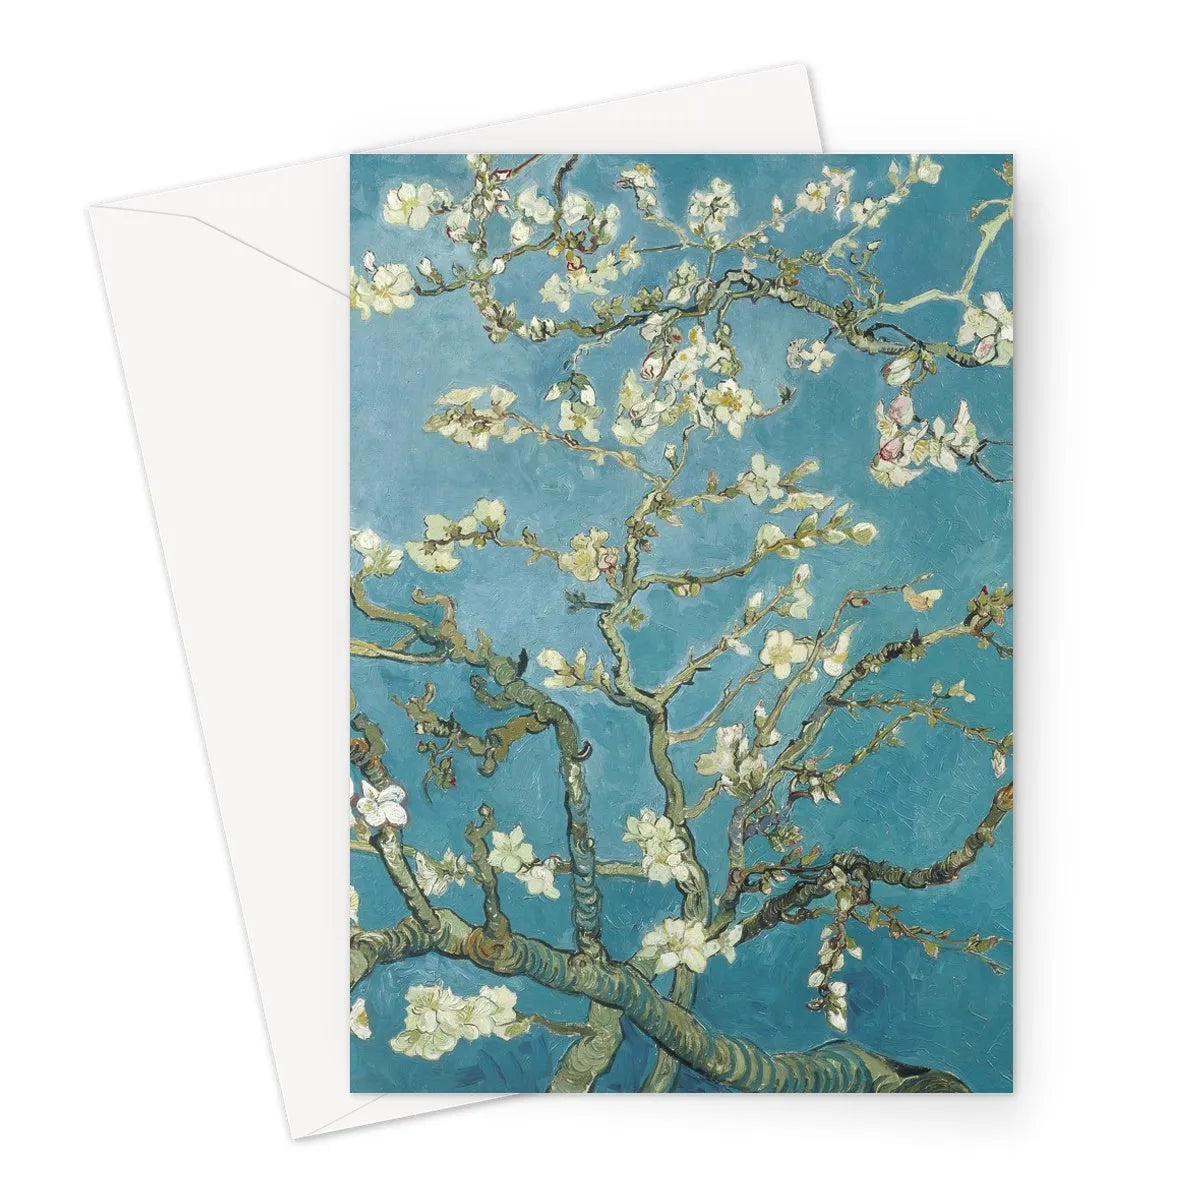 Almond Blossom By Vincent Van Gogh Greeting Card - A5 Portrait / 1 Card - Notebooks & Notepads - Aesthetic Art